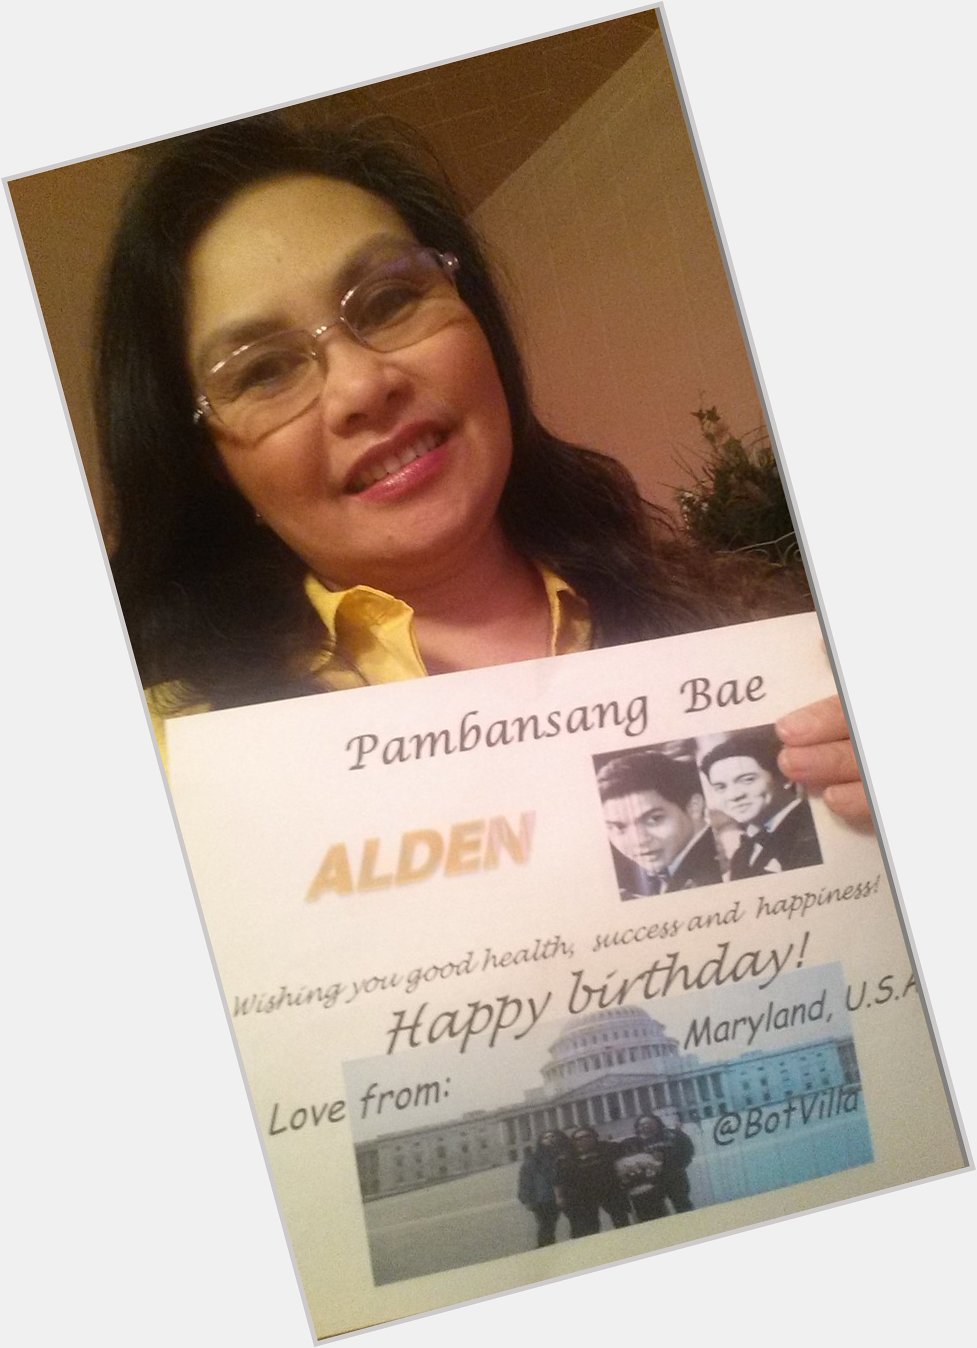 You will be my idol forever ALDEN RICHARDS! Happy Birthday!   